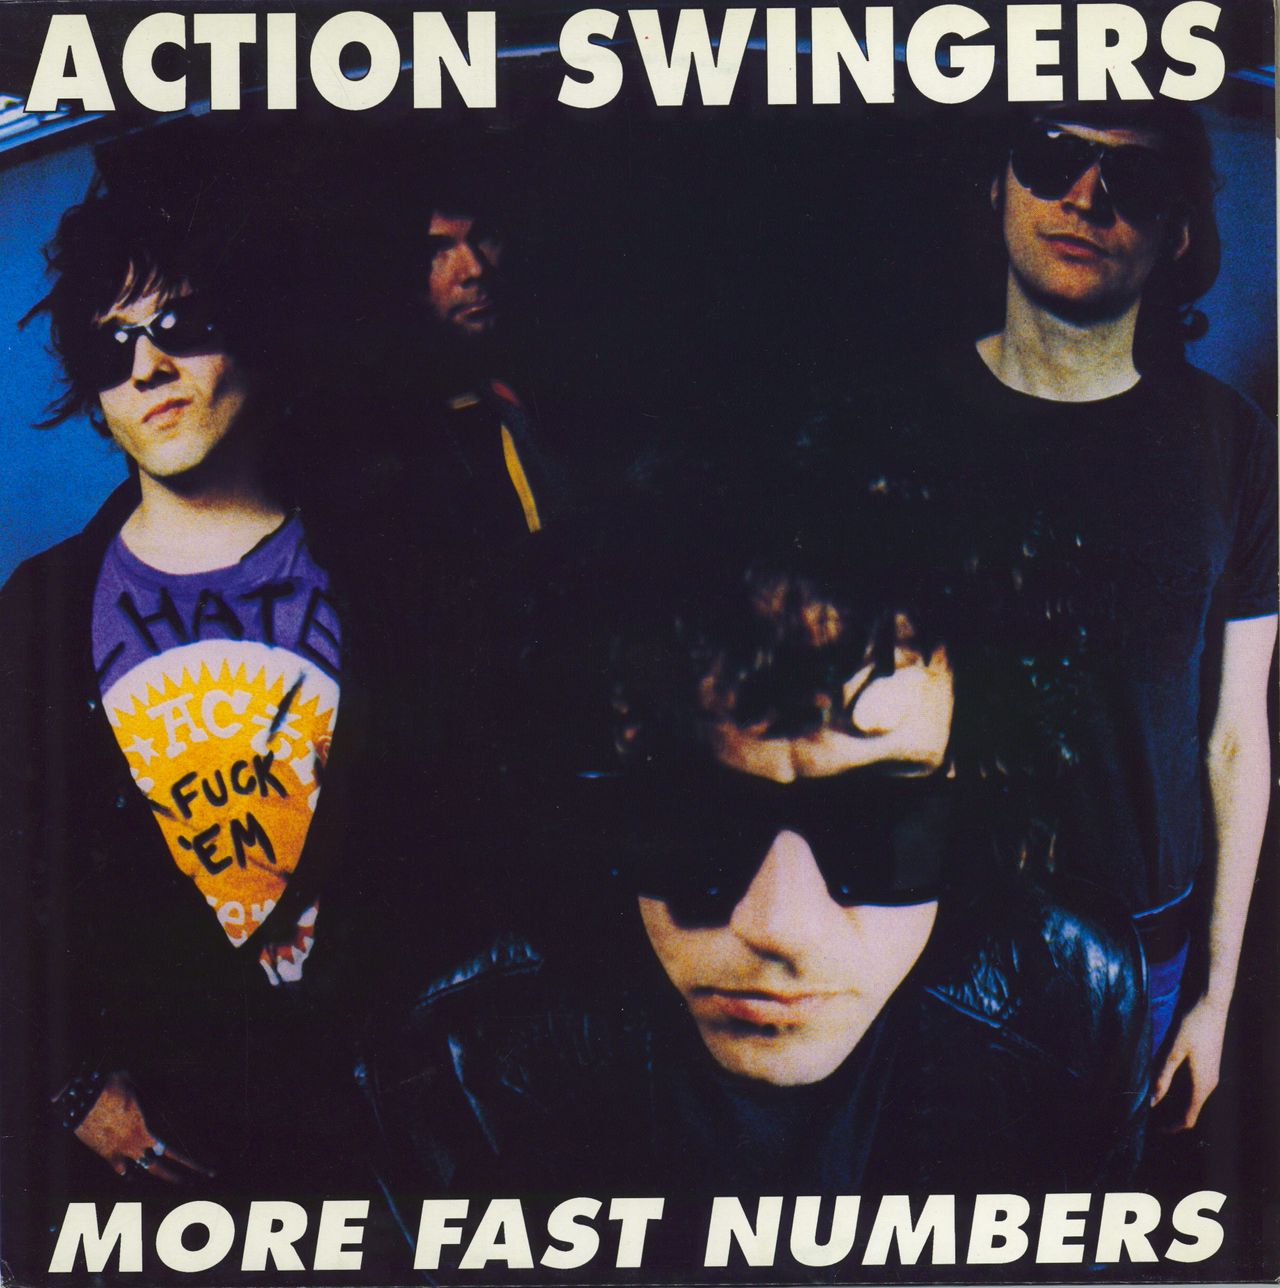 Action Swingers More Fast Numbers UK 12" vinyl single (12 inch record / Maxi-single) WIJ14V